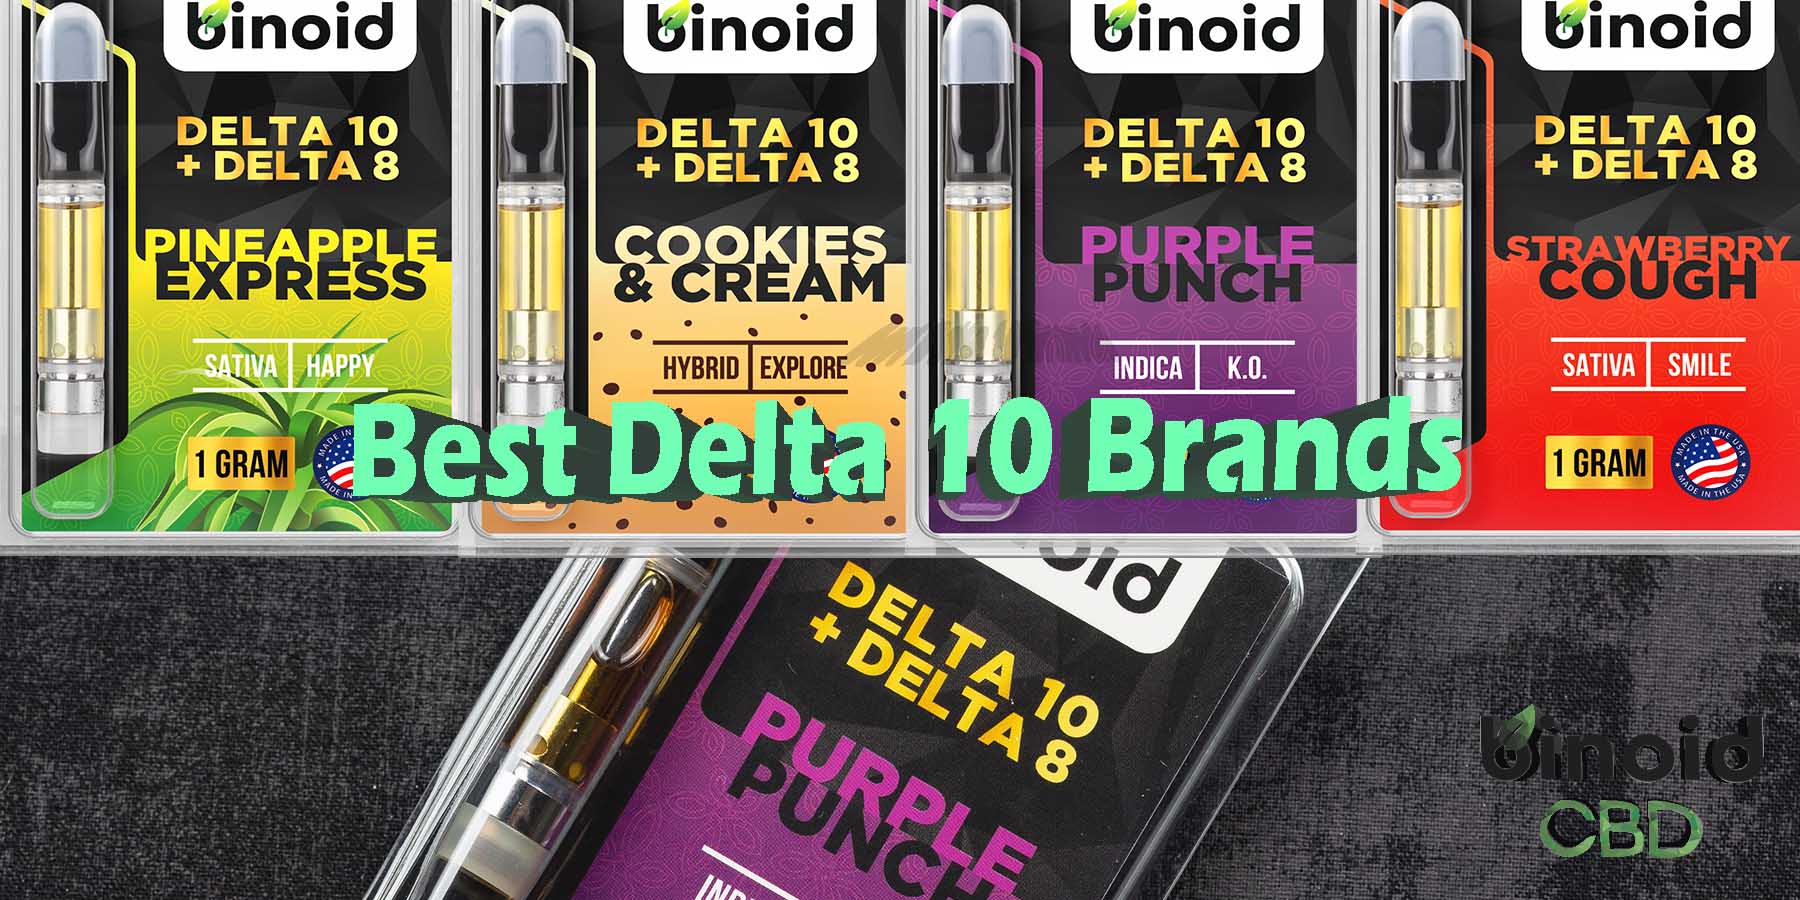 Best Delta 10 Brands Best Disposable Vape 2 Gram Review Take Work Online Best Brand Price Get Near Me Lowest Coupon Discount Store Shop Vapes Carts Online Strong